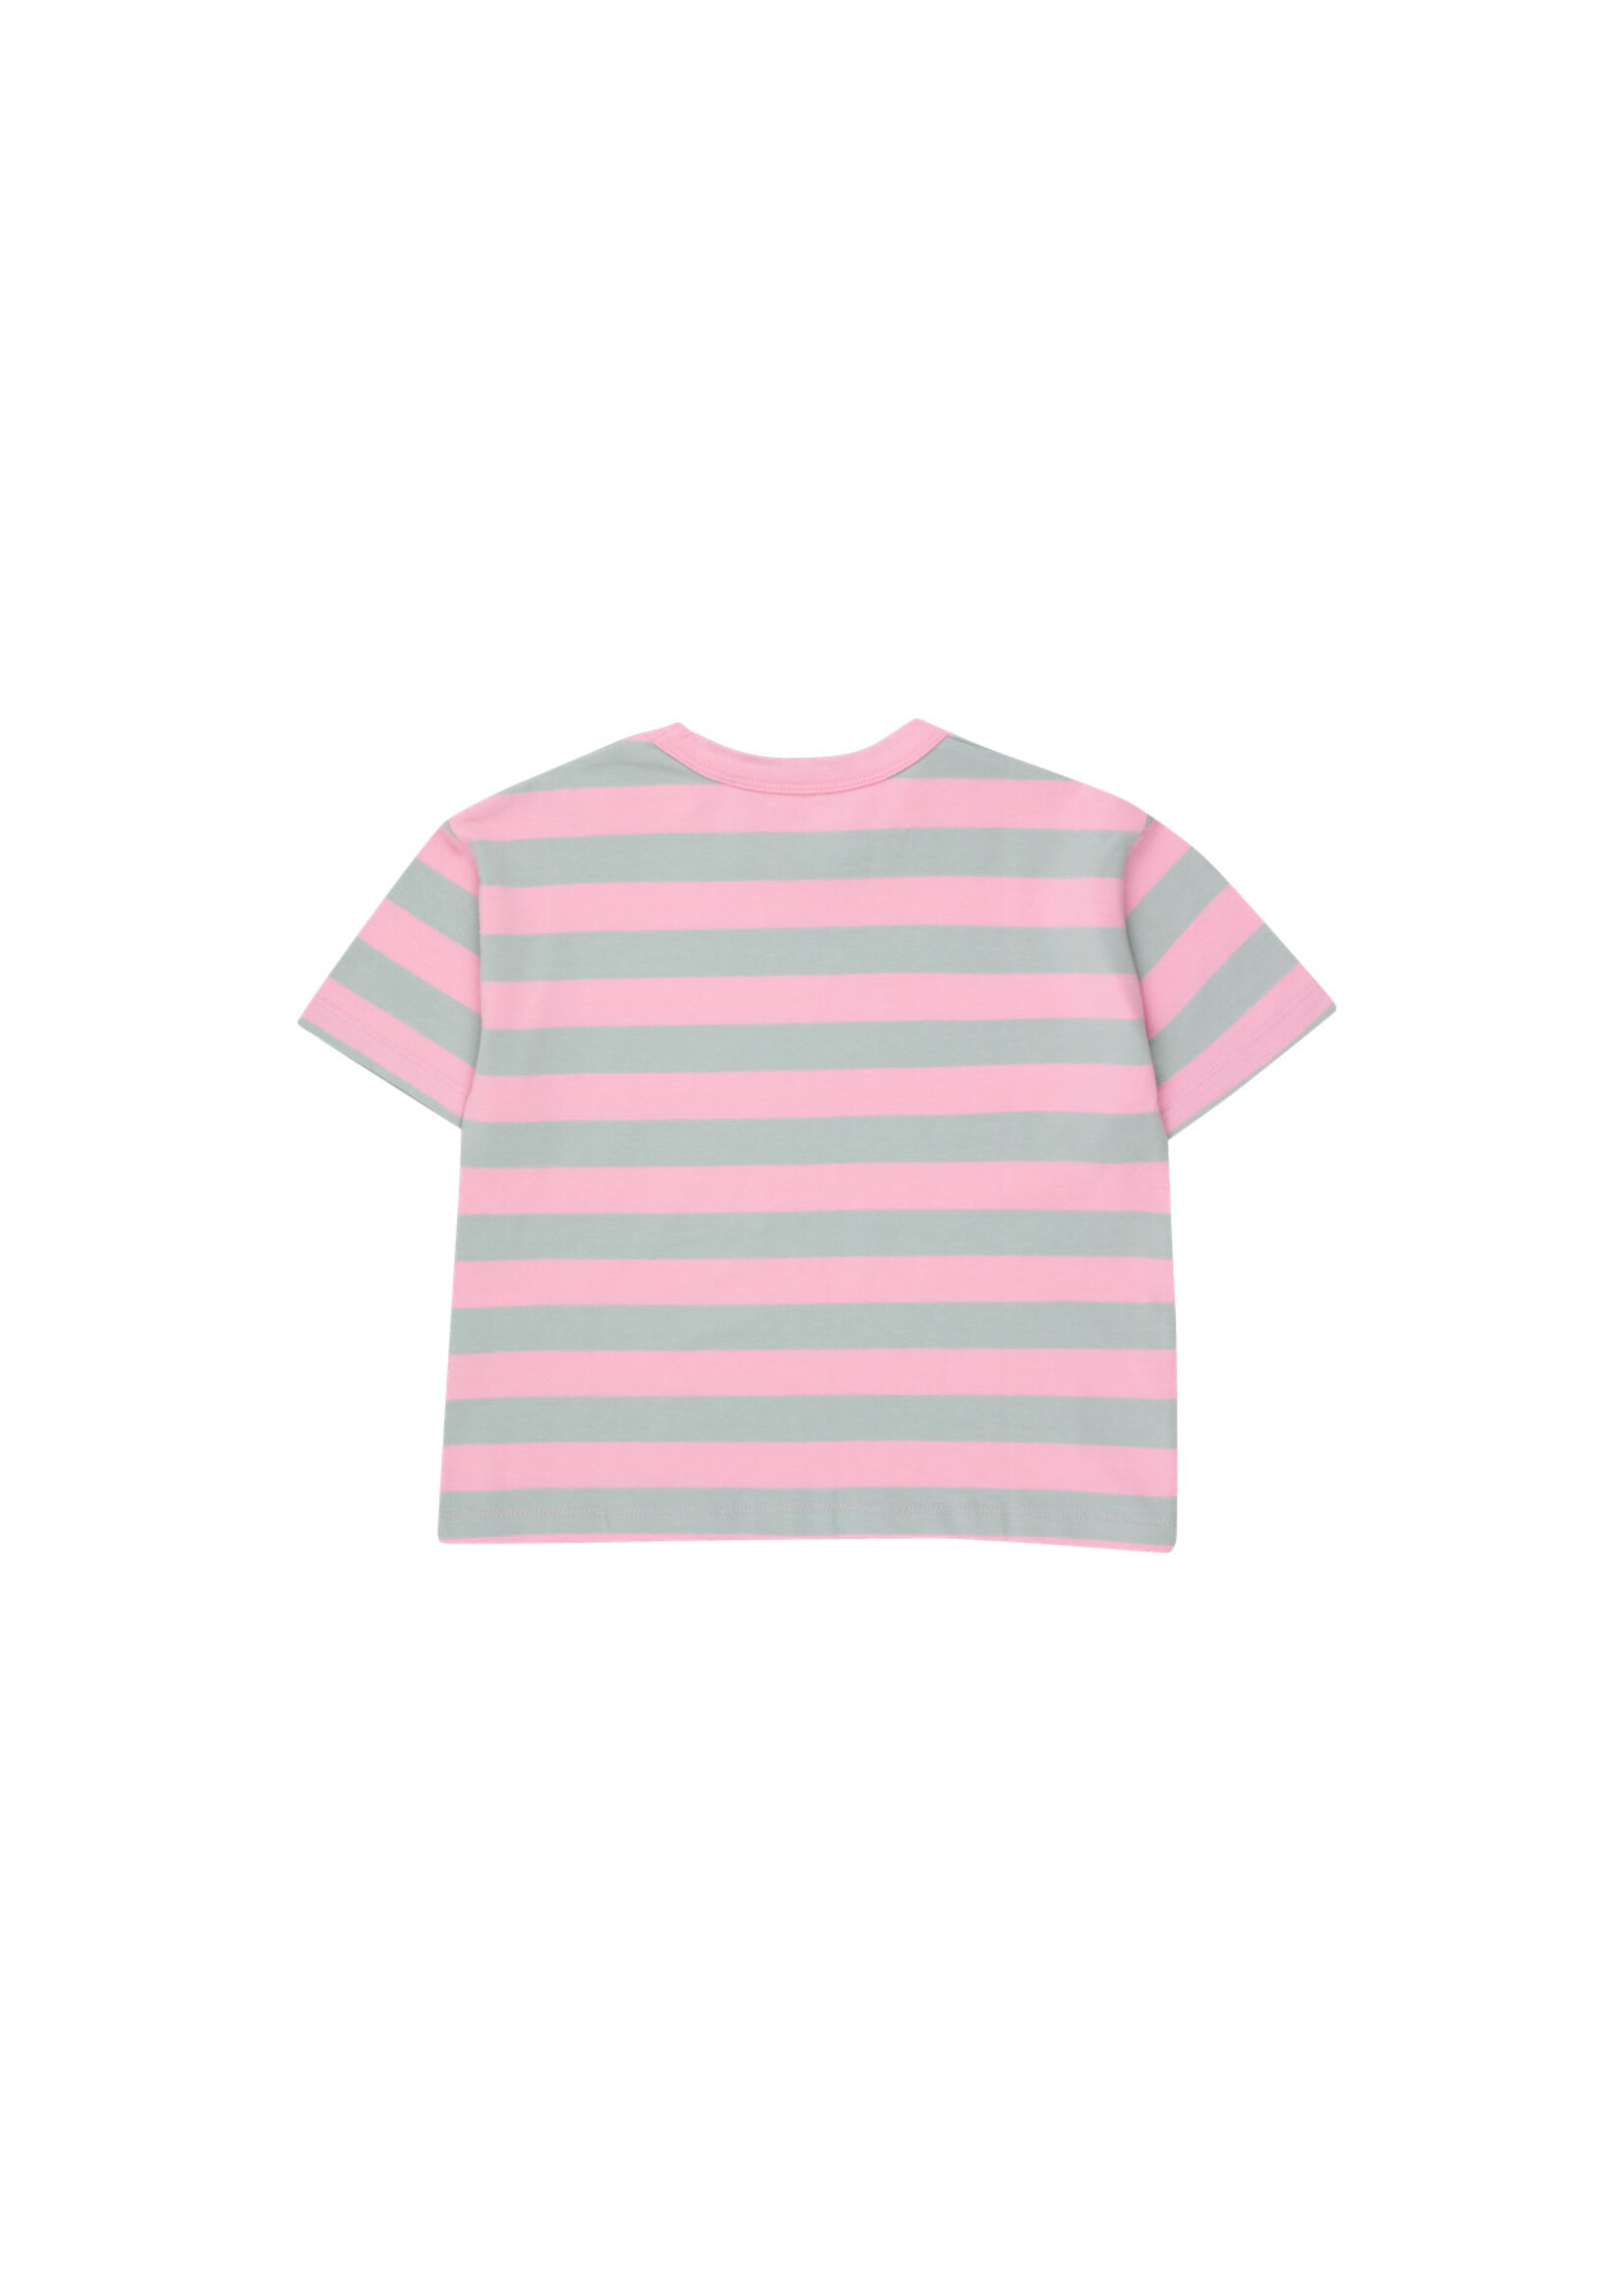 TinyCottons TinyCottons T-Shirt Stripes Pink/Grey